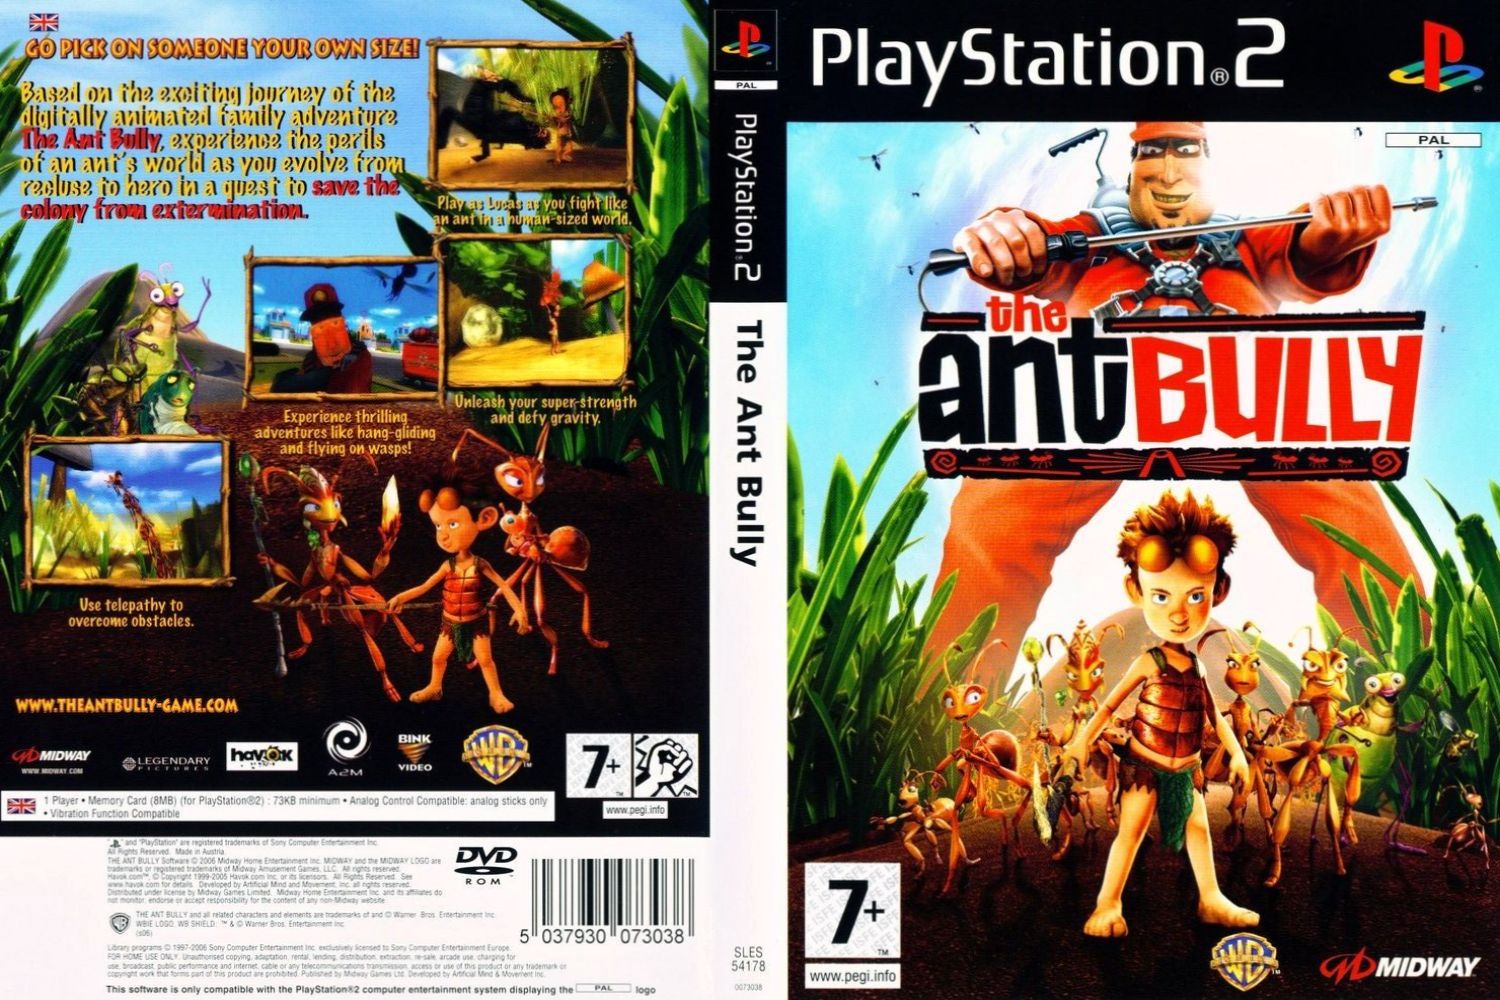 Download bully ps2 iso bahasa indonesia